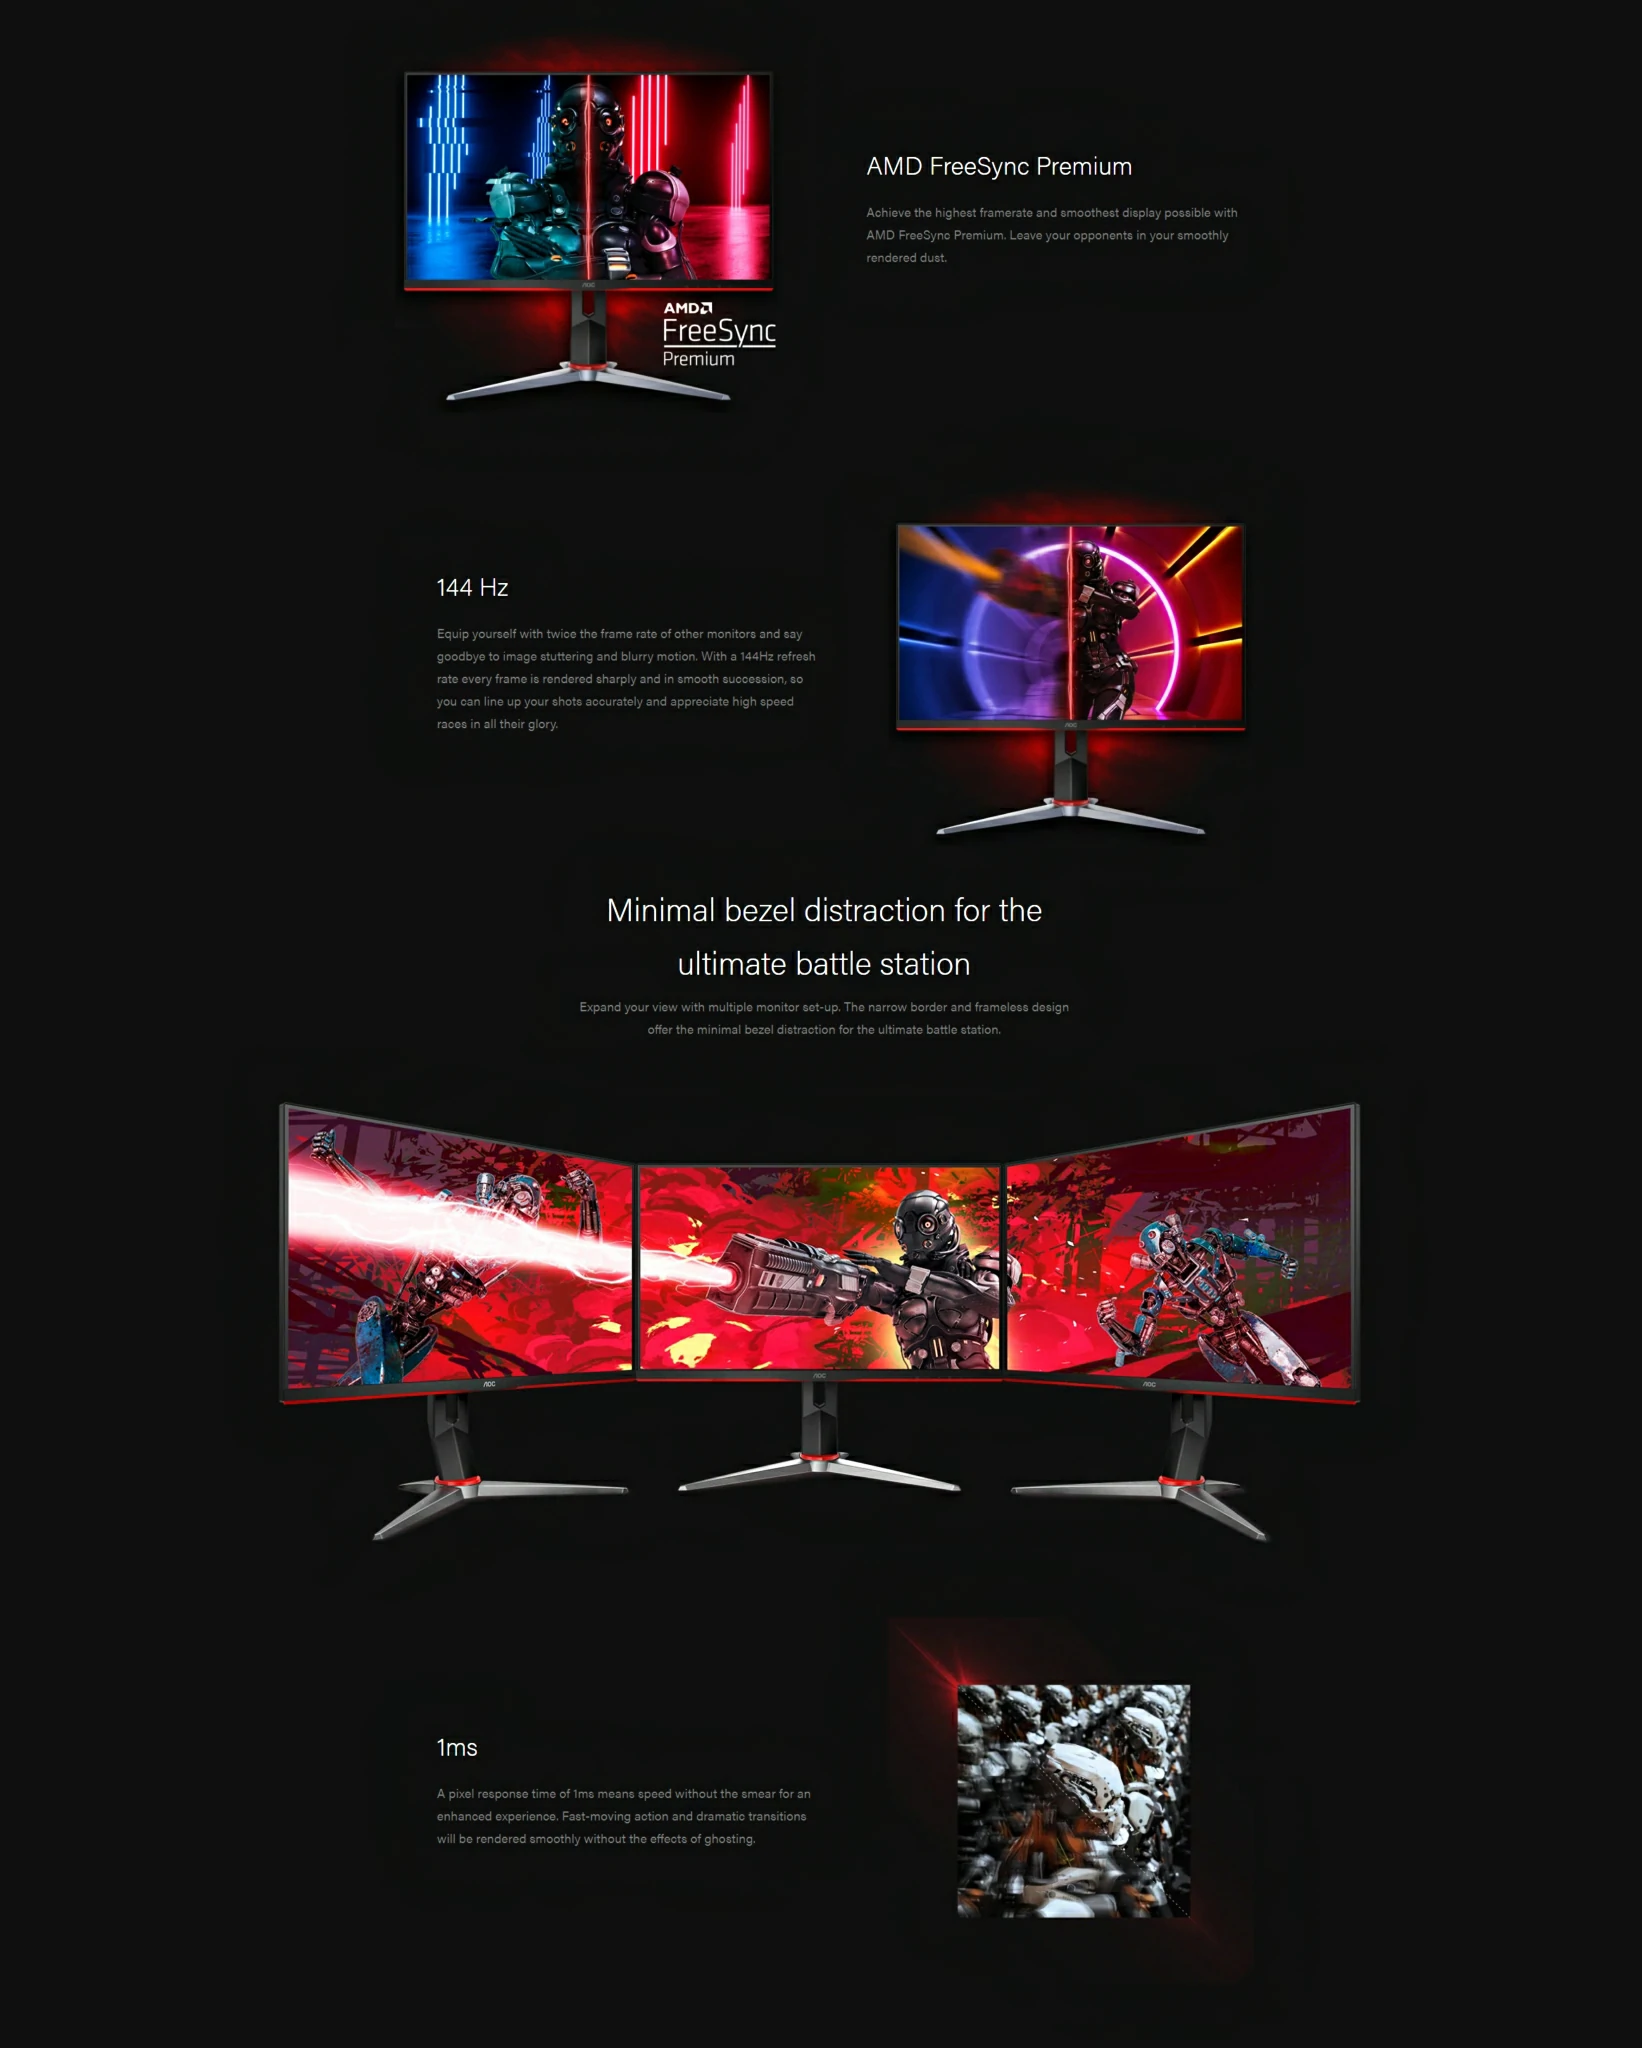 Overview - AOC 24G2 24-inch Frameless Gaming IPS Monitor